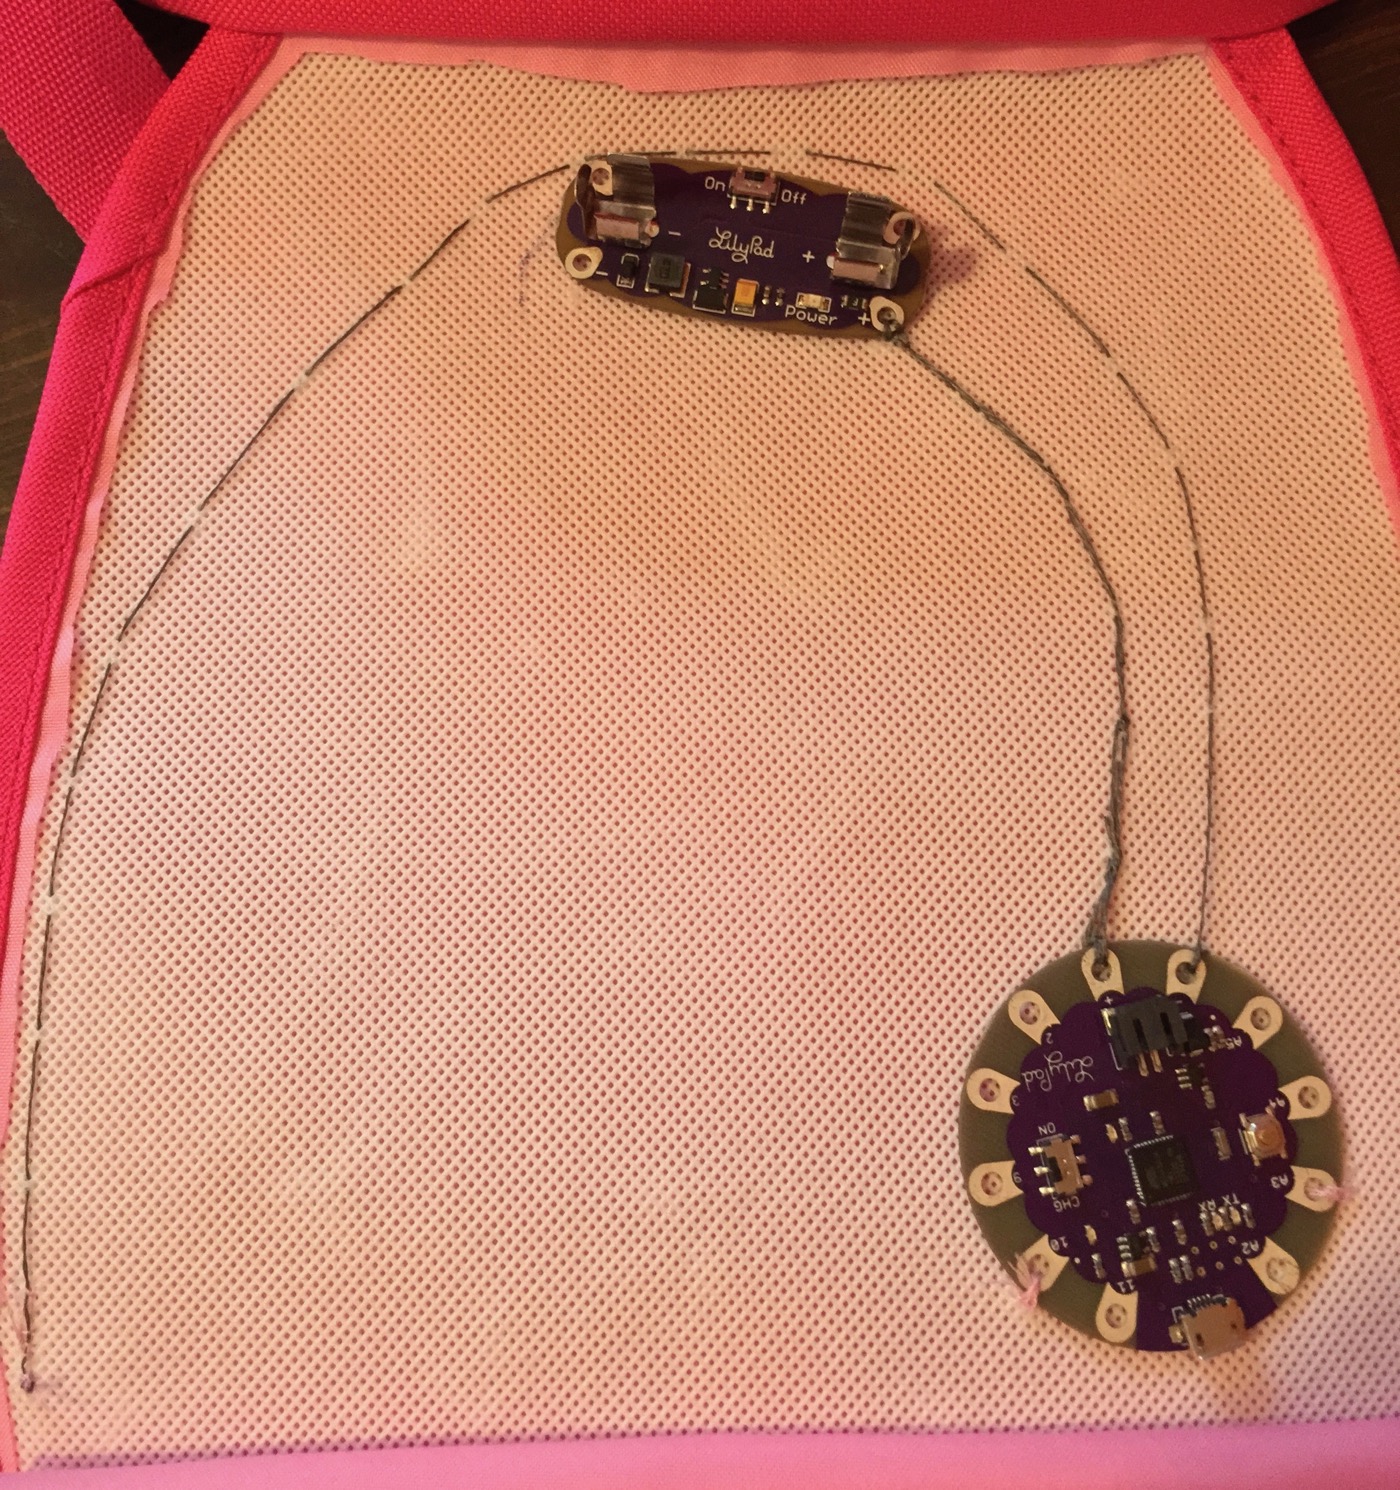 Purse with LilyPad Arduino and battery sewn into place